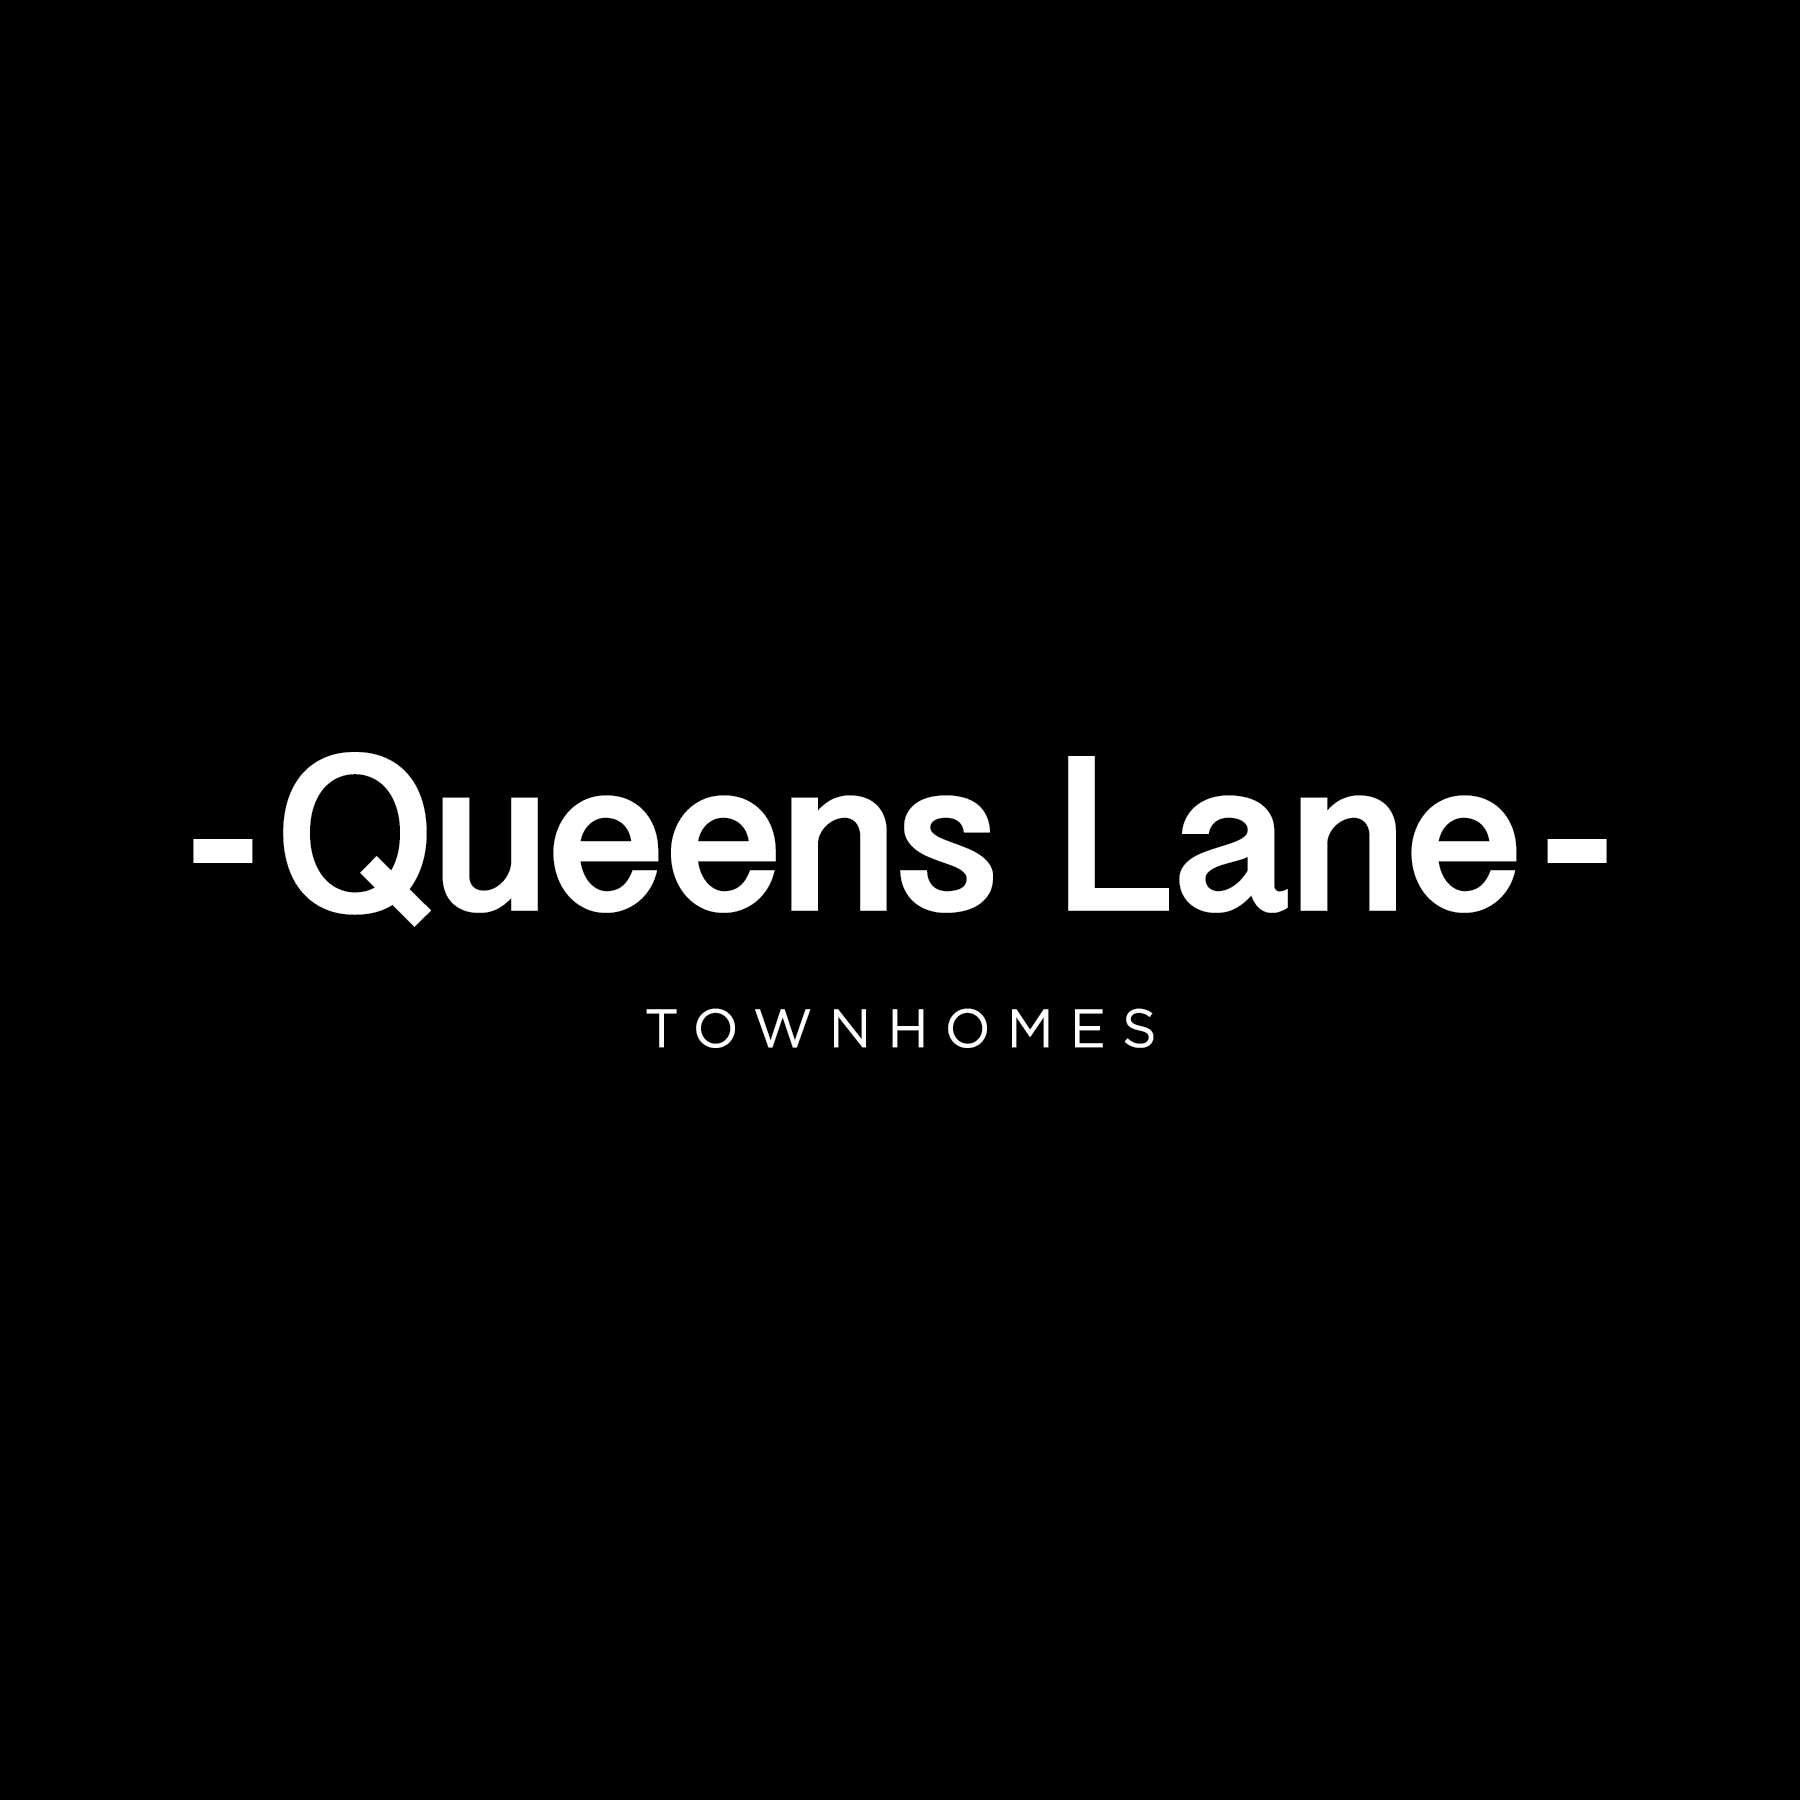 Queens Lane Townhomes